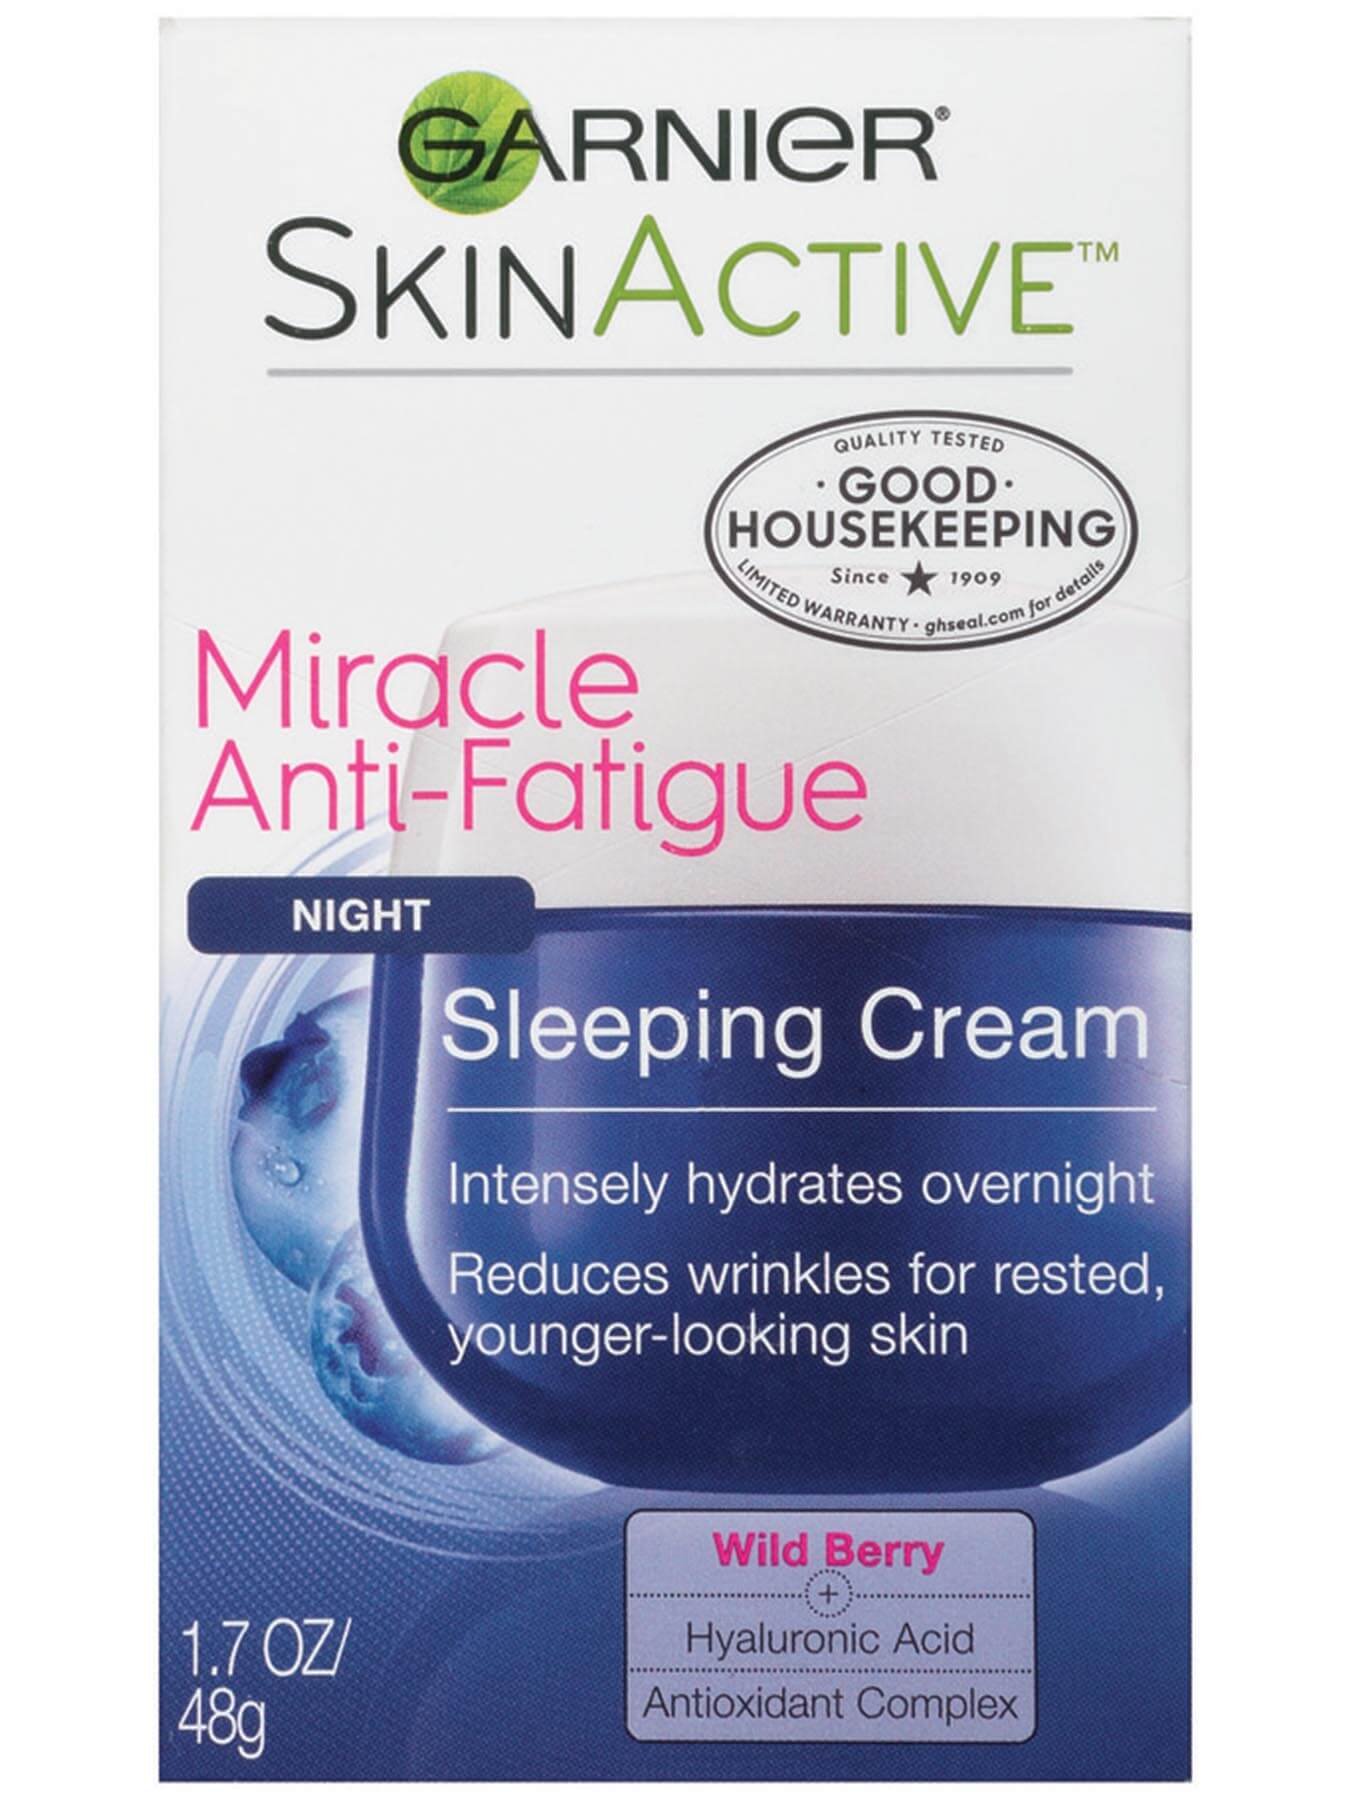 Front view of Ultra Lift Miracle Anti-Fatigue Sleeping Cream box.